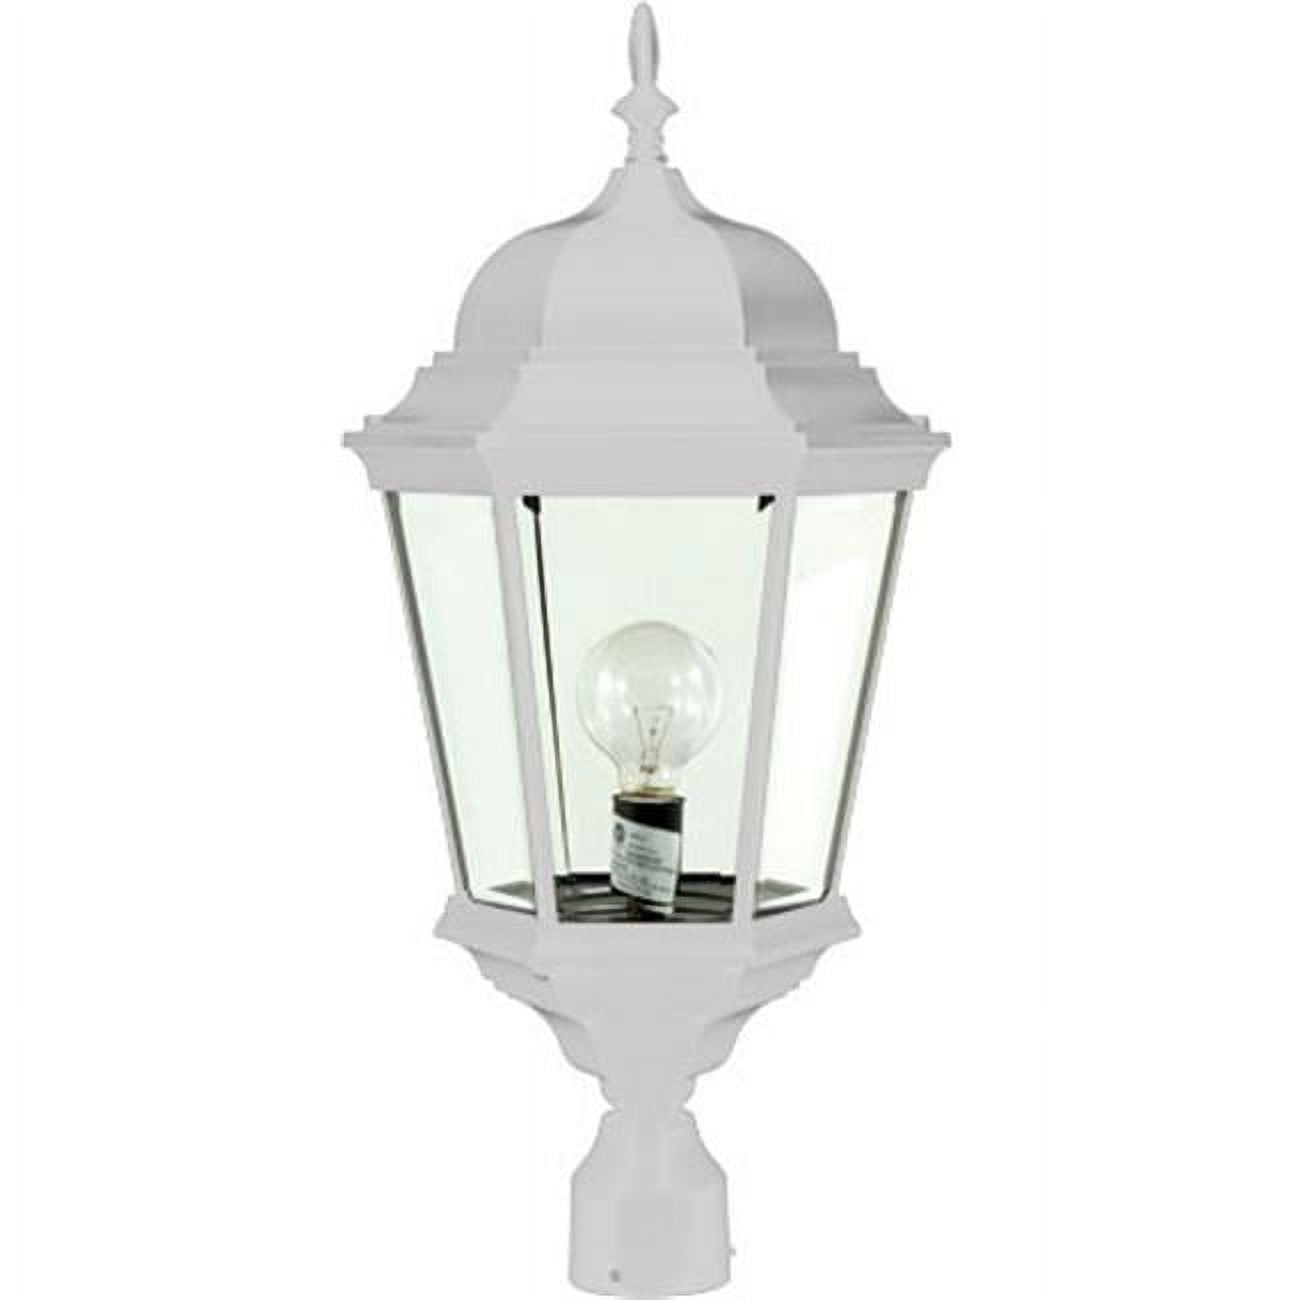 Picture of Dabmar Lighting GM236-W-FROST Post Top Fixture with Frosted Glass - 13W DL-S13-GU24 120V, White